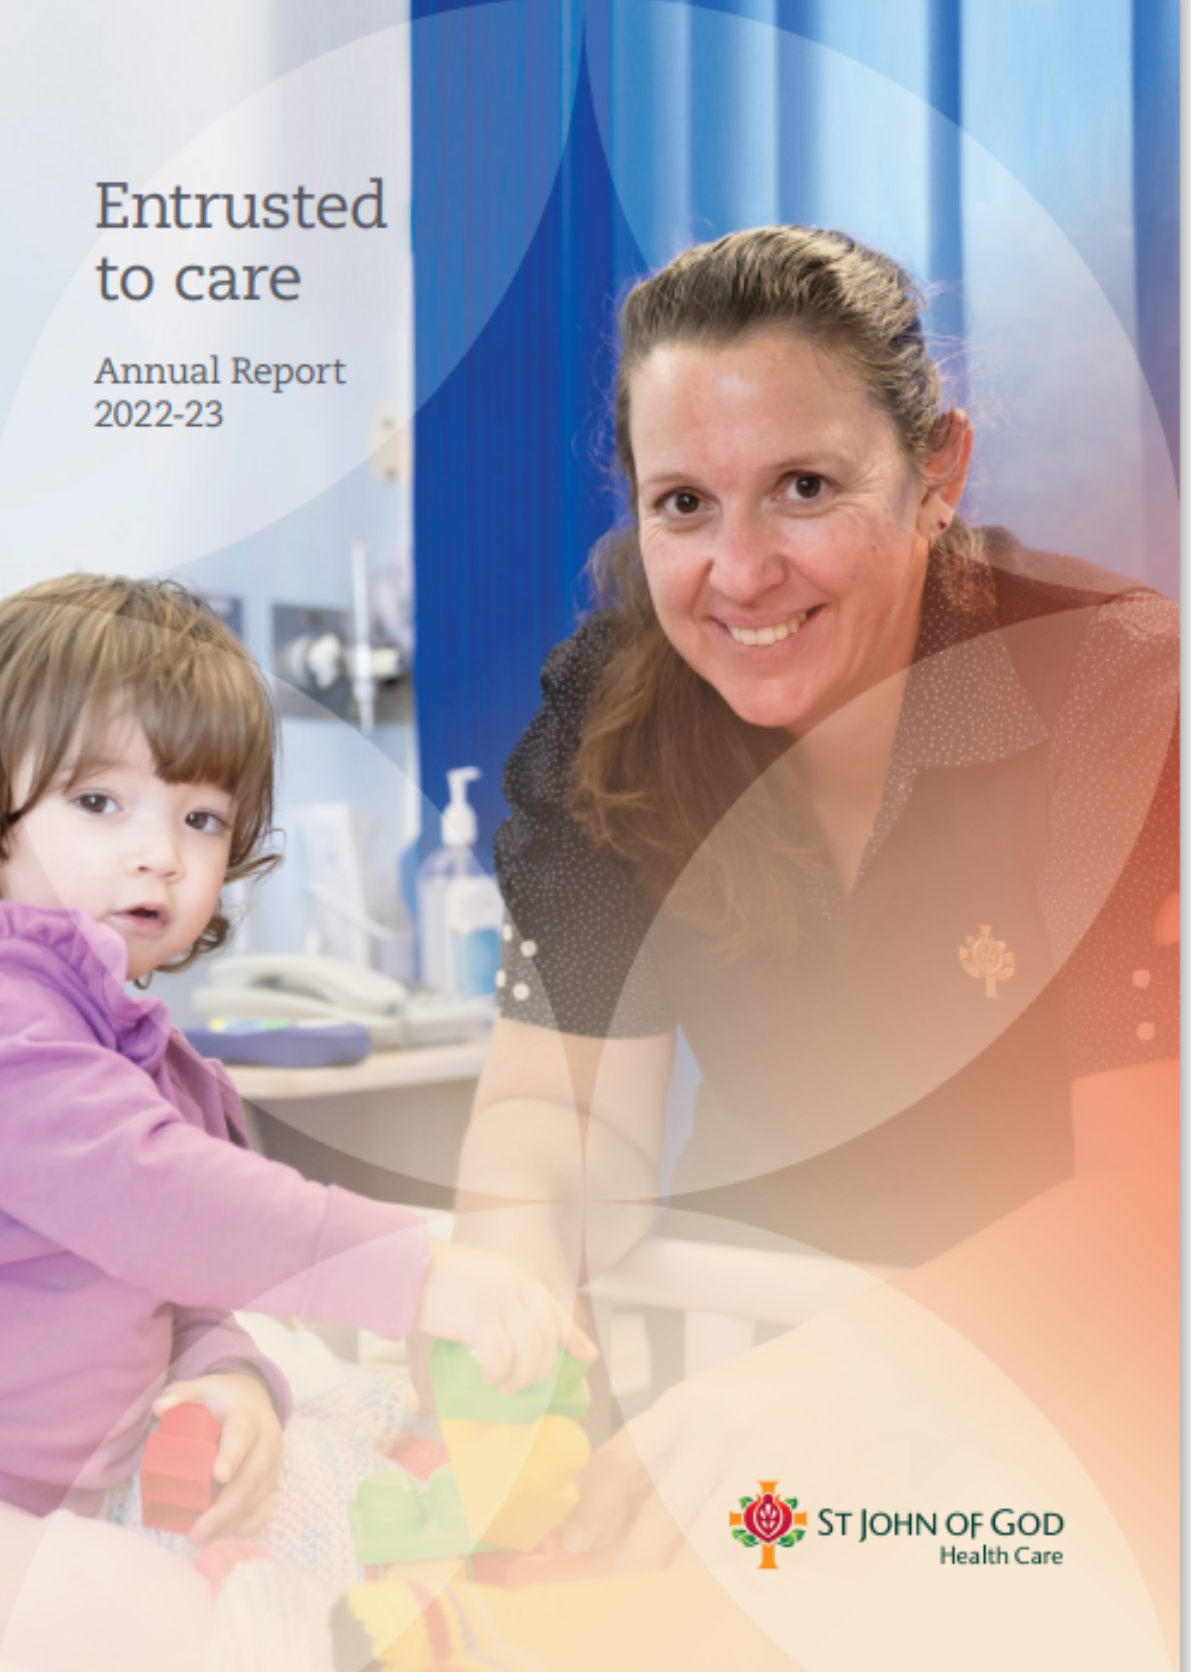 Cover of the St John of God Health Care Annual Report 2022-23, which features a caregiver smiling, playing with a small child in a hospital bed.